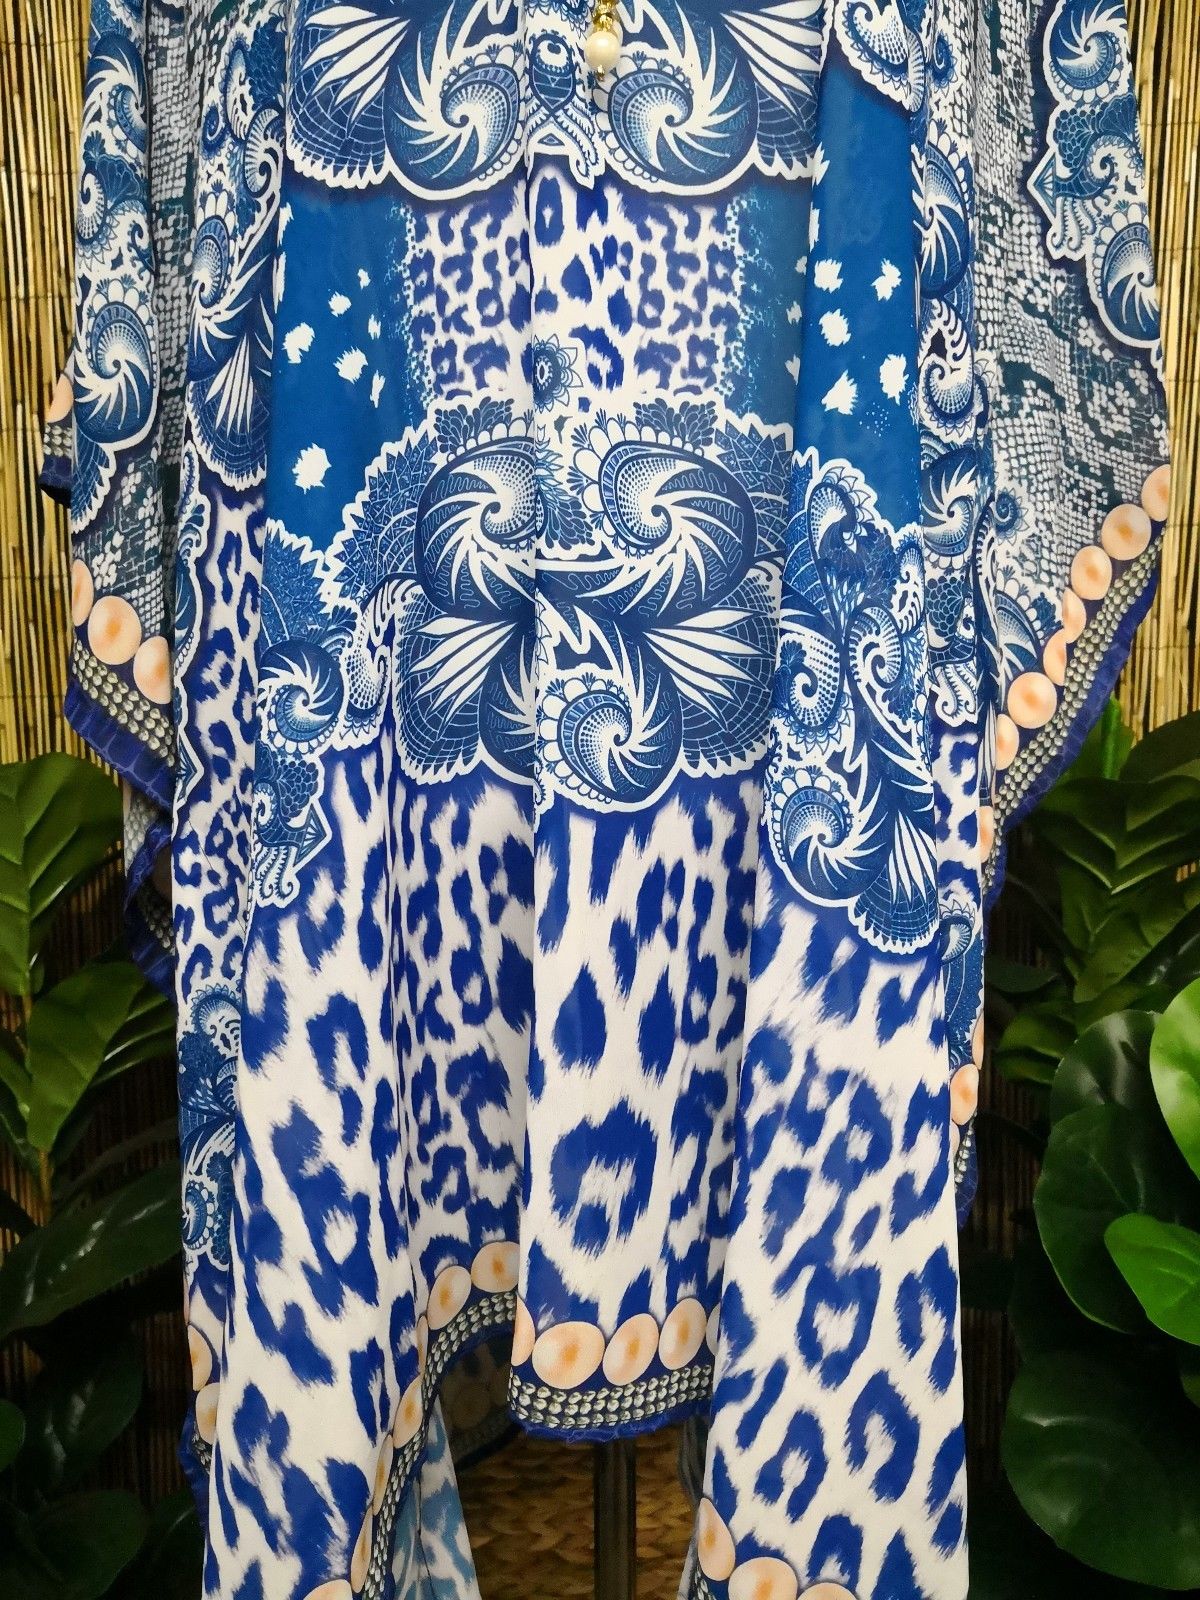 Plus Size Sheer Chiffon Embellished Kaftan Digital Printed One Size Fits All 16 to 24